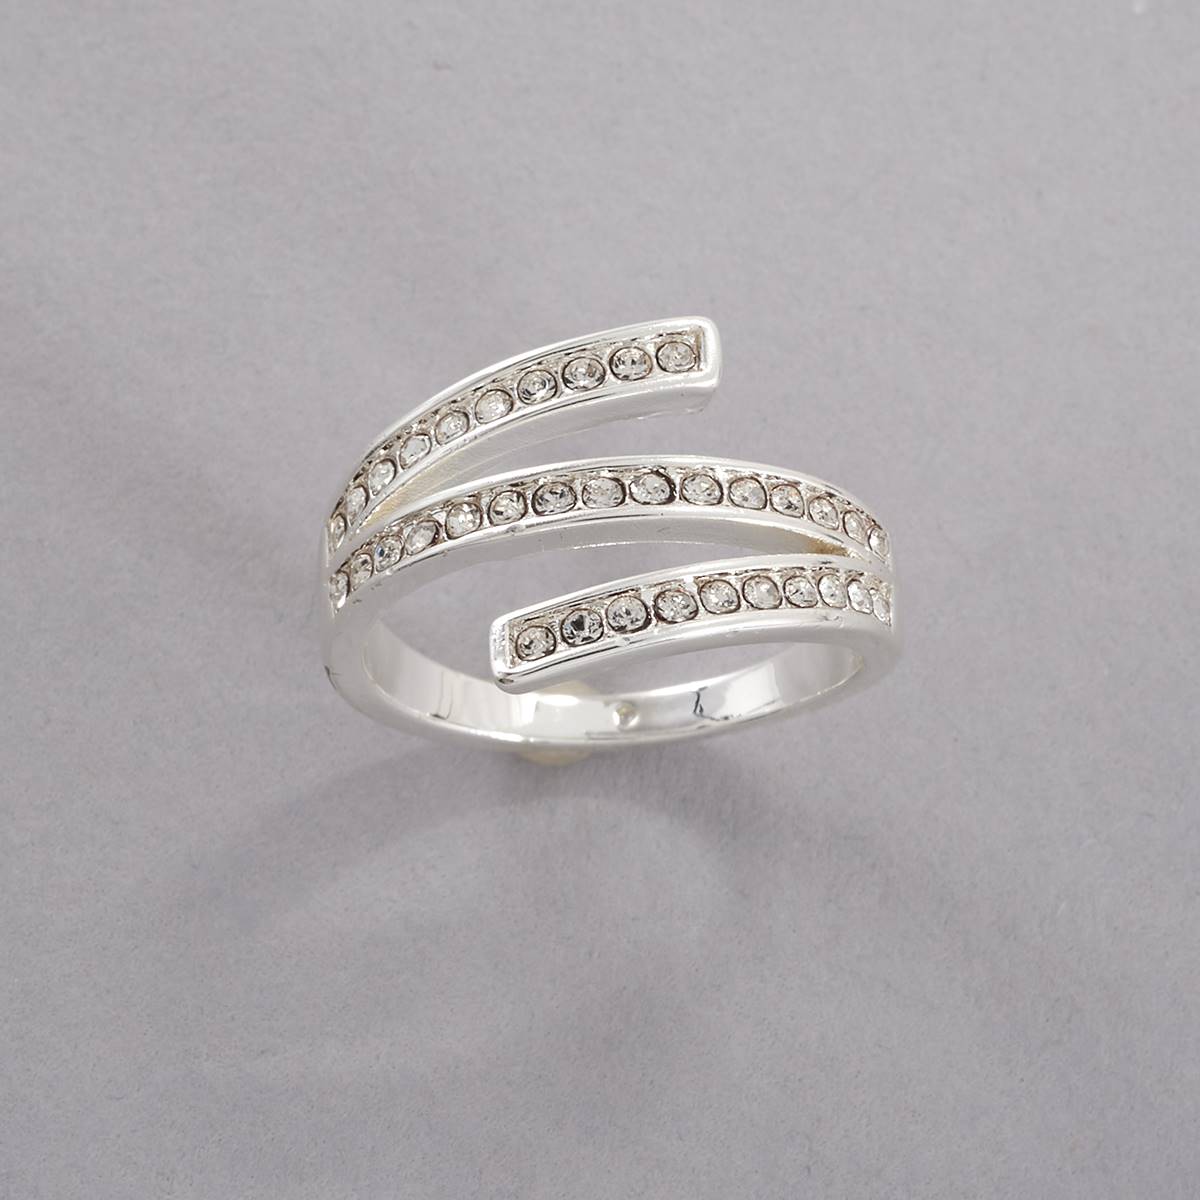 Ashley Cooper(tm) Silver & Crystal Pave Eternity Wrap Ring